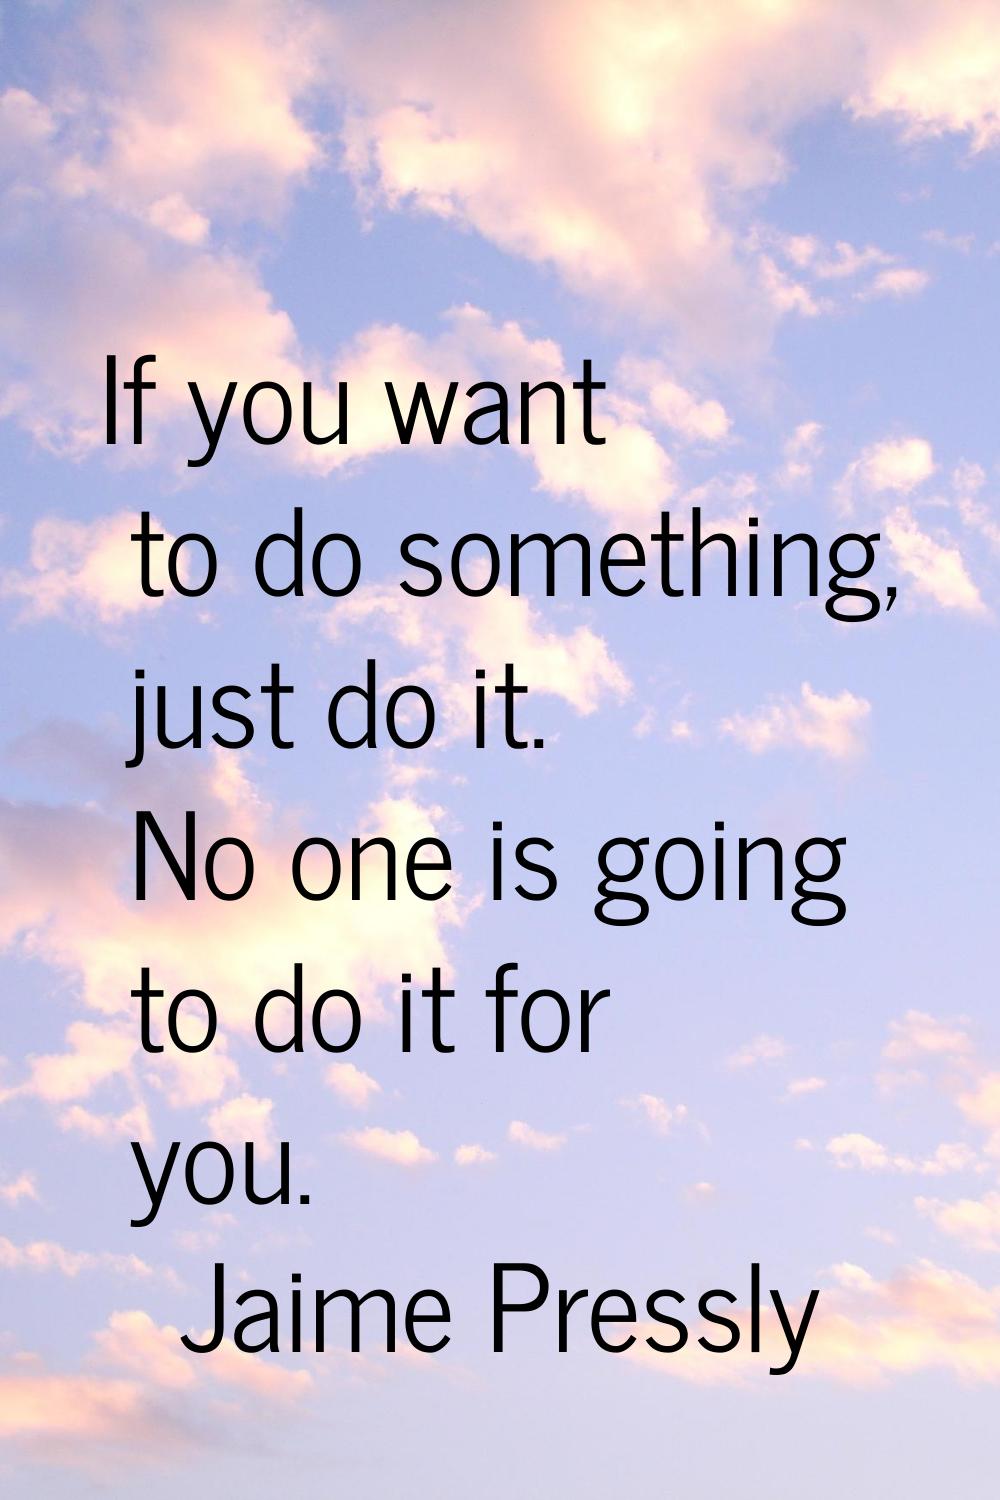 If you want to do something, just do it. No one is going to do it for you.